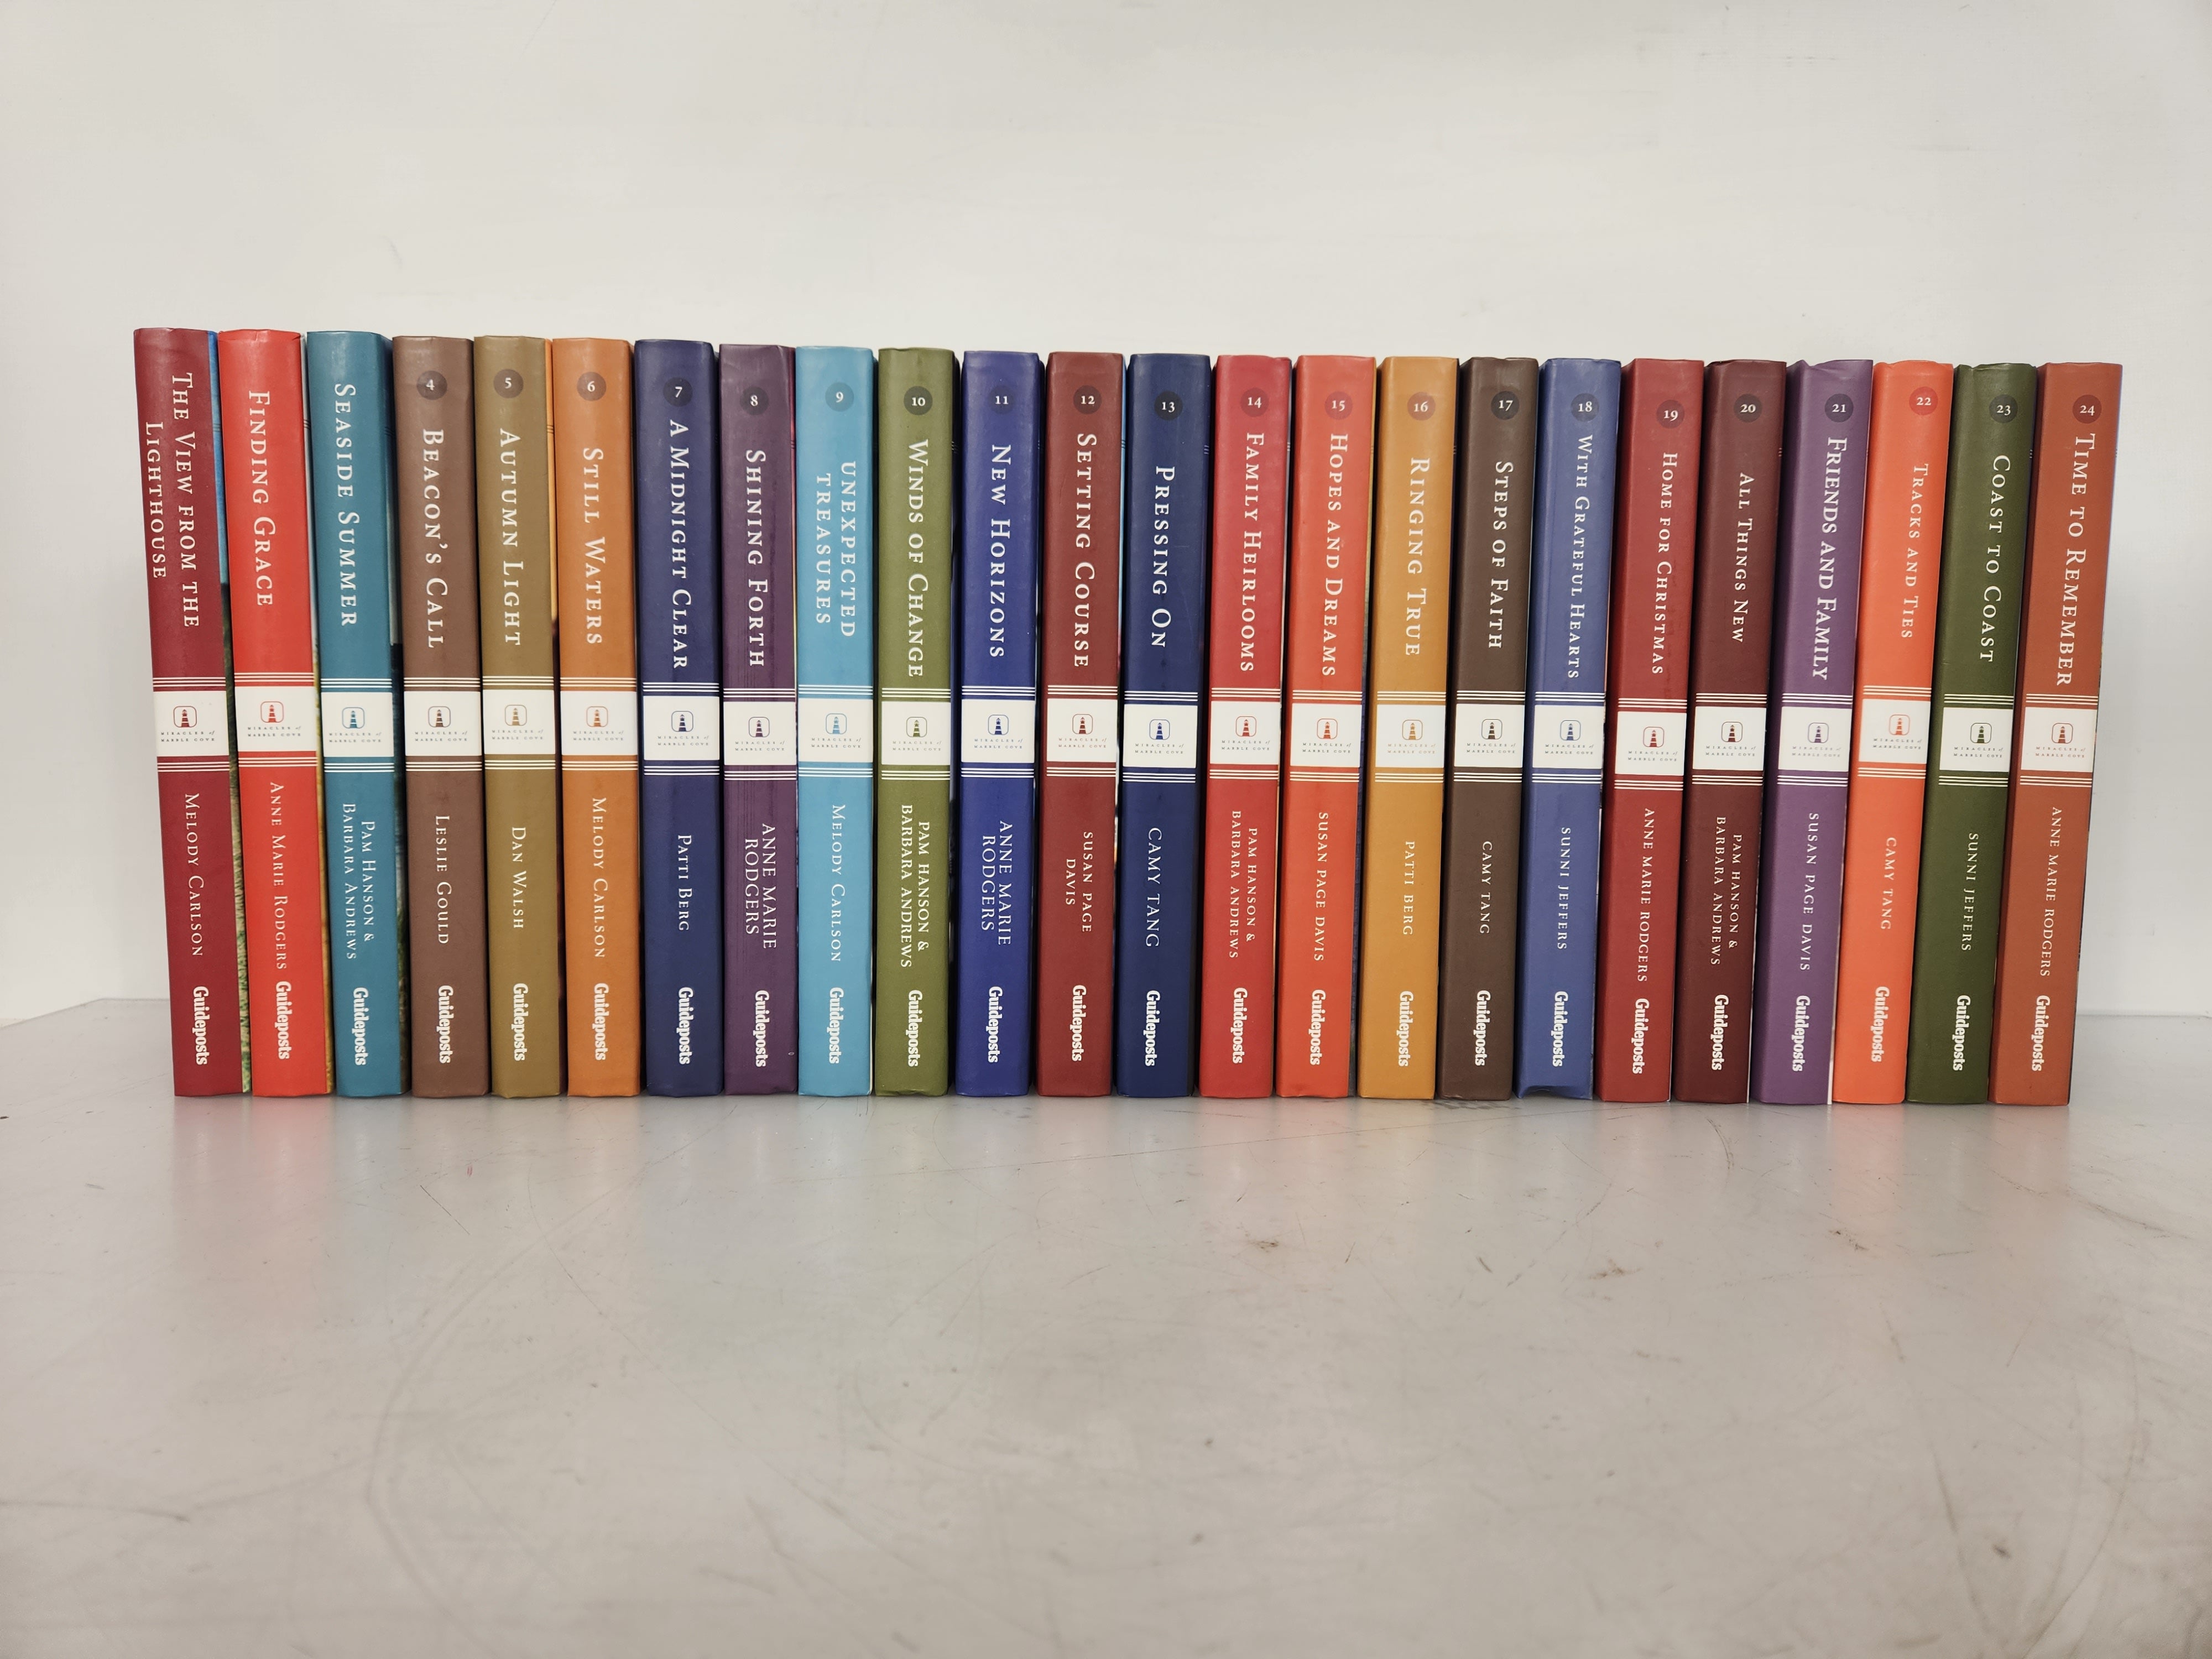 Lot of 24 Miracles of Marble Cove by Guideposts Complete Set 1-24